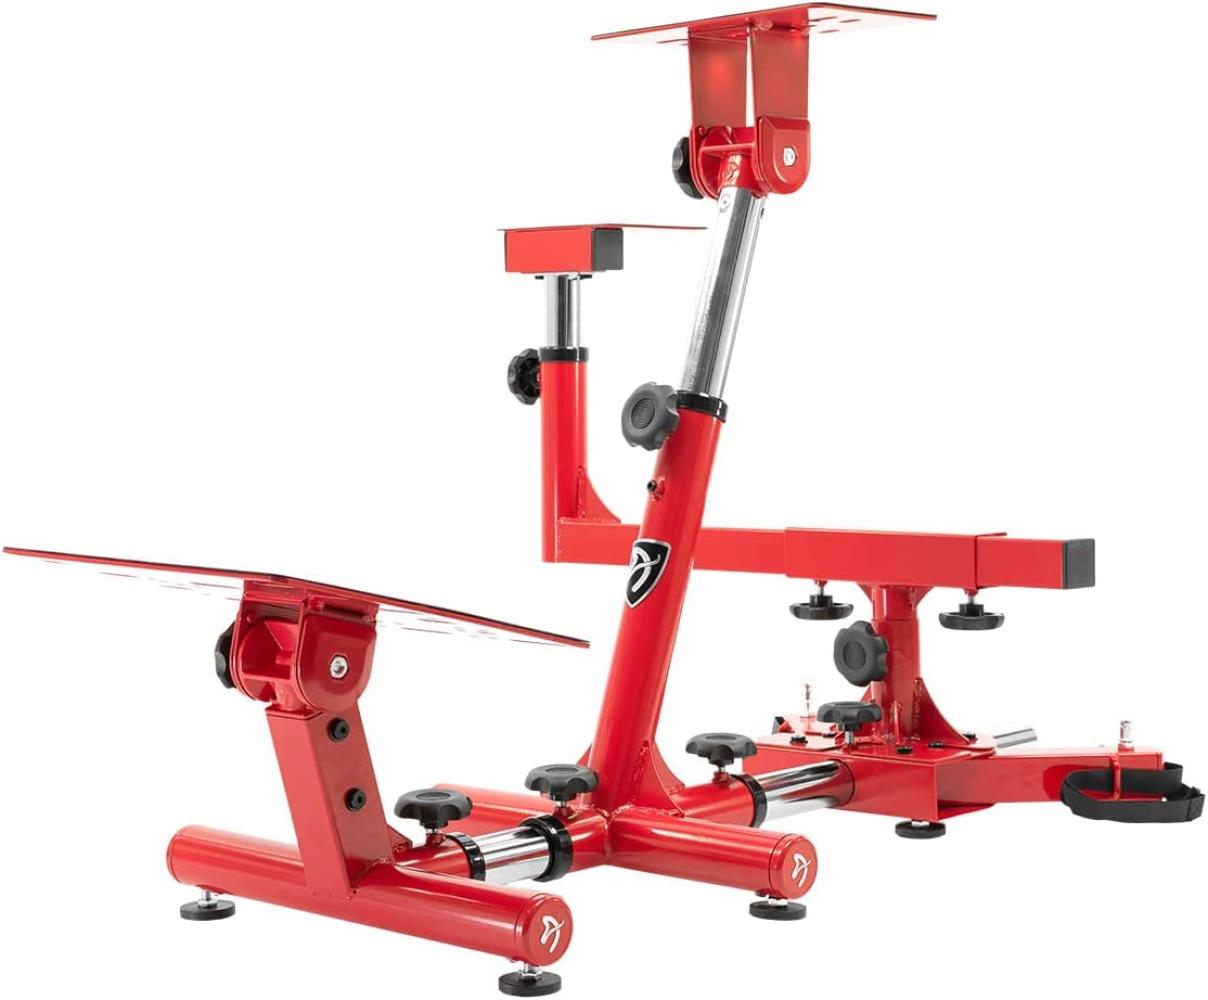 Arozzi Velocitŕ - gaming chair wheel/pedals stand - metal - red Gaming Stuhl Rad / Pedale stehen - Metall - Bild 1